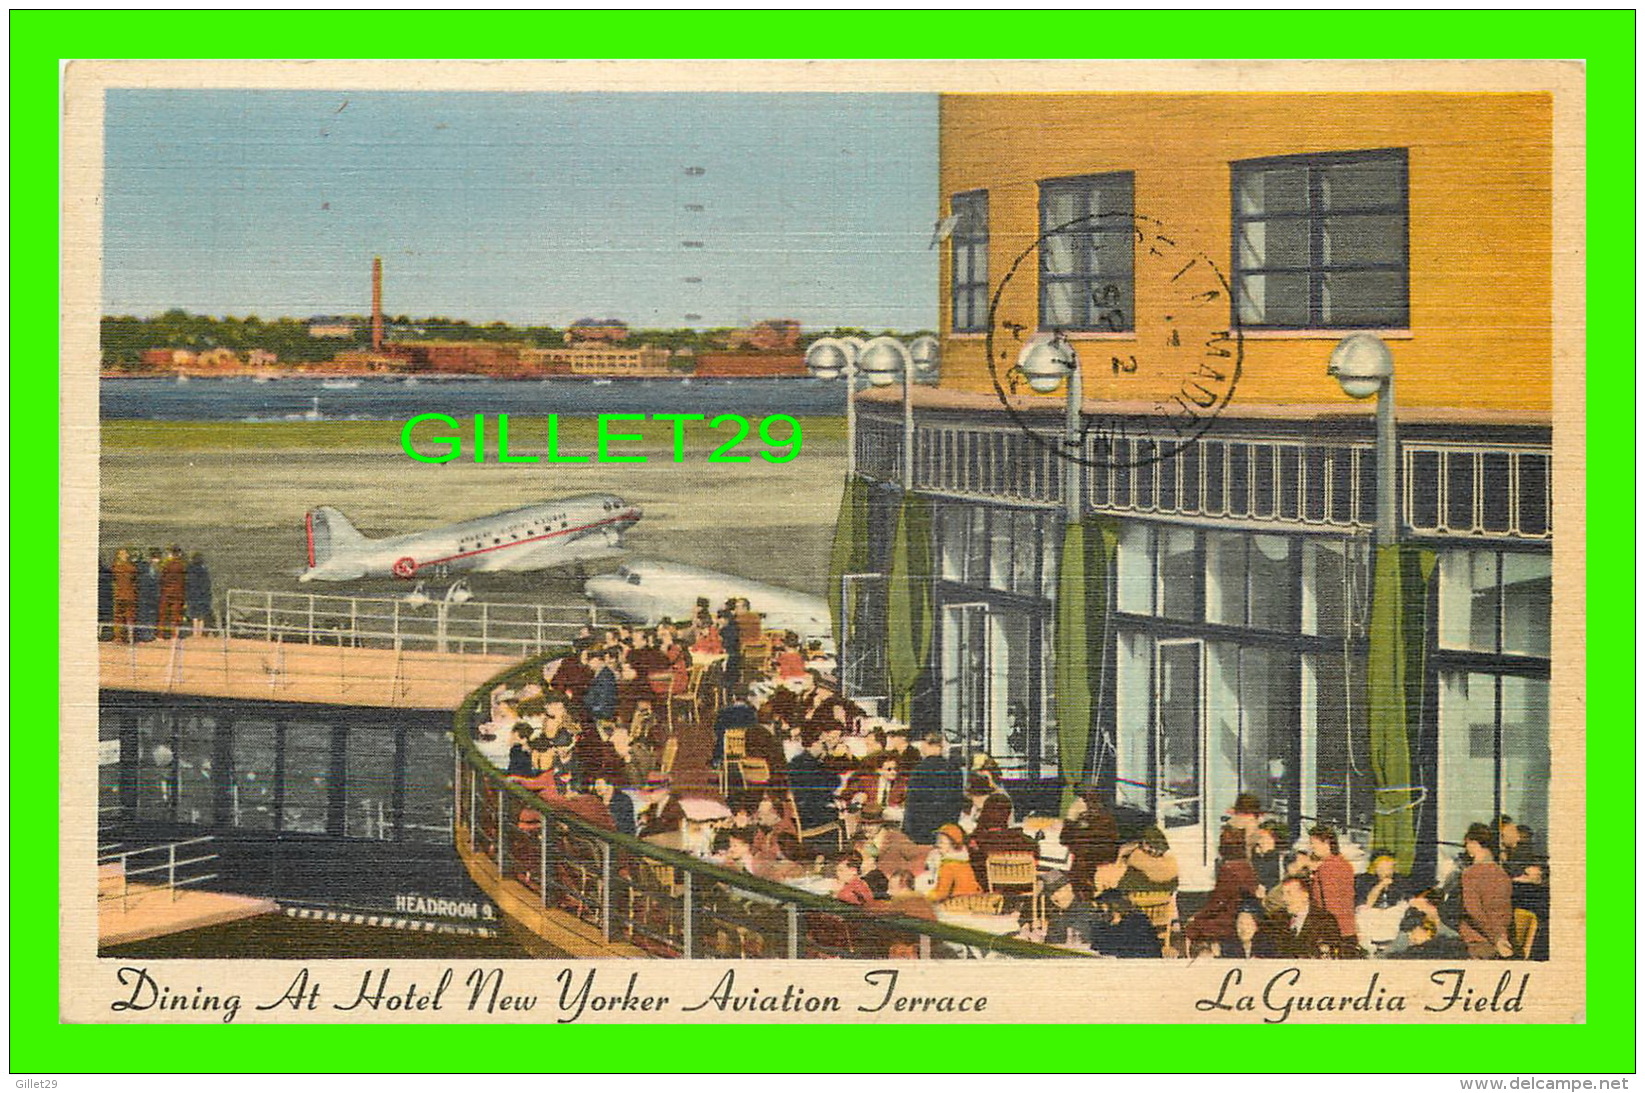 LA GUARDIA FIELD, NY - DINING AT HOTEL NEW YORKER AVIATION TERRACE - TRAVEL IN 1947 - - Luchthavens